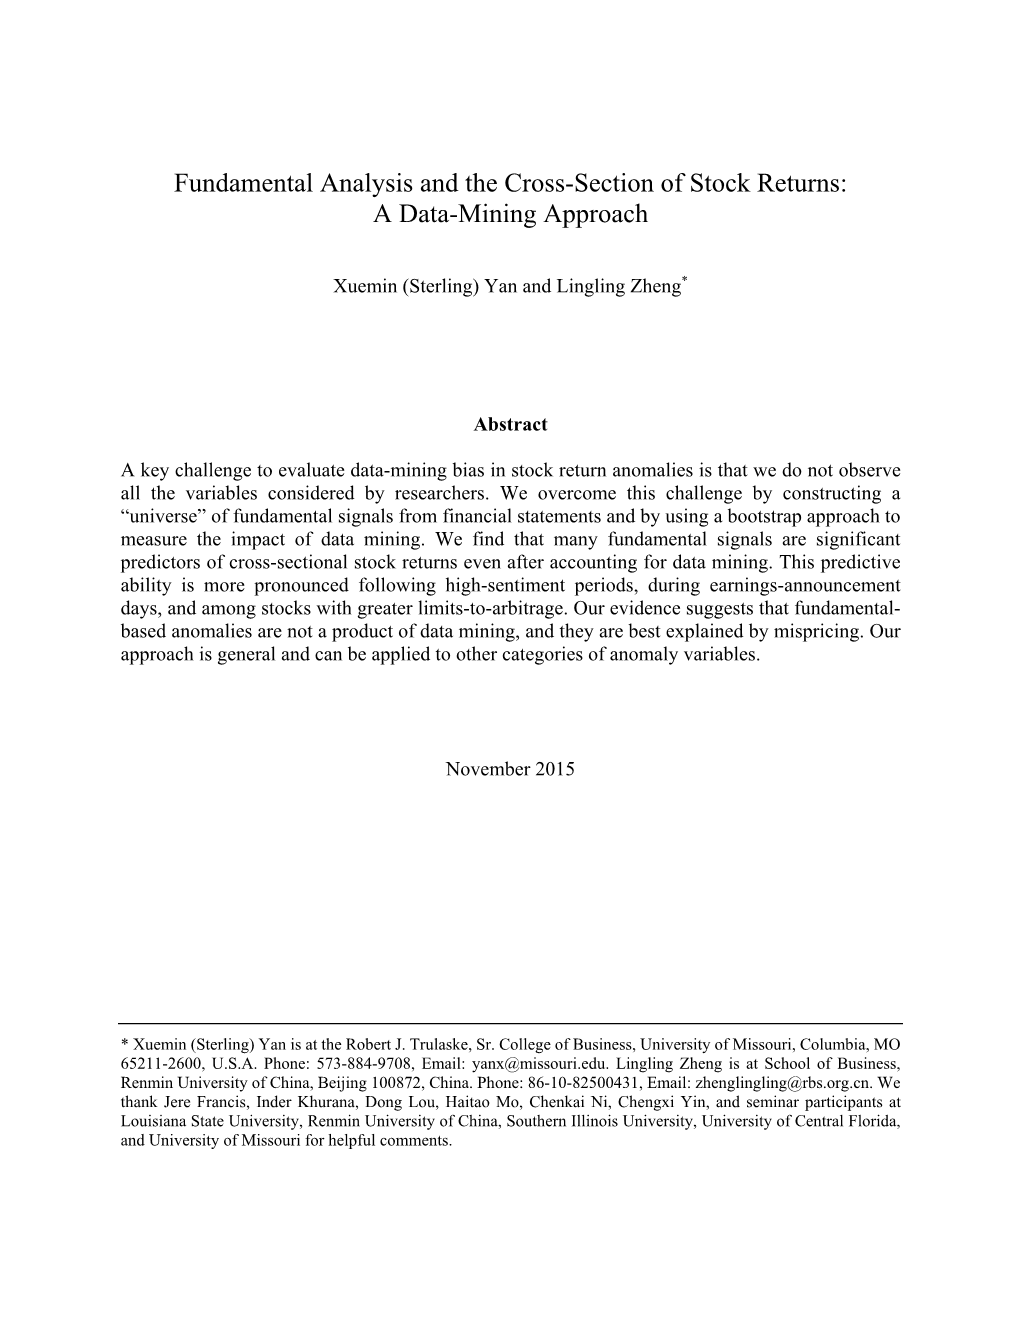 Fundamental Analysis and the Cross-Section of Stock Returns: a Data-Mining Approach